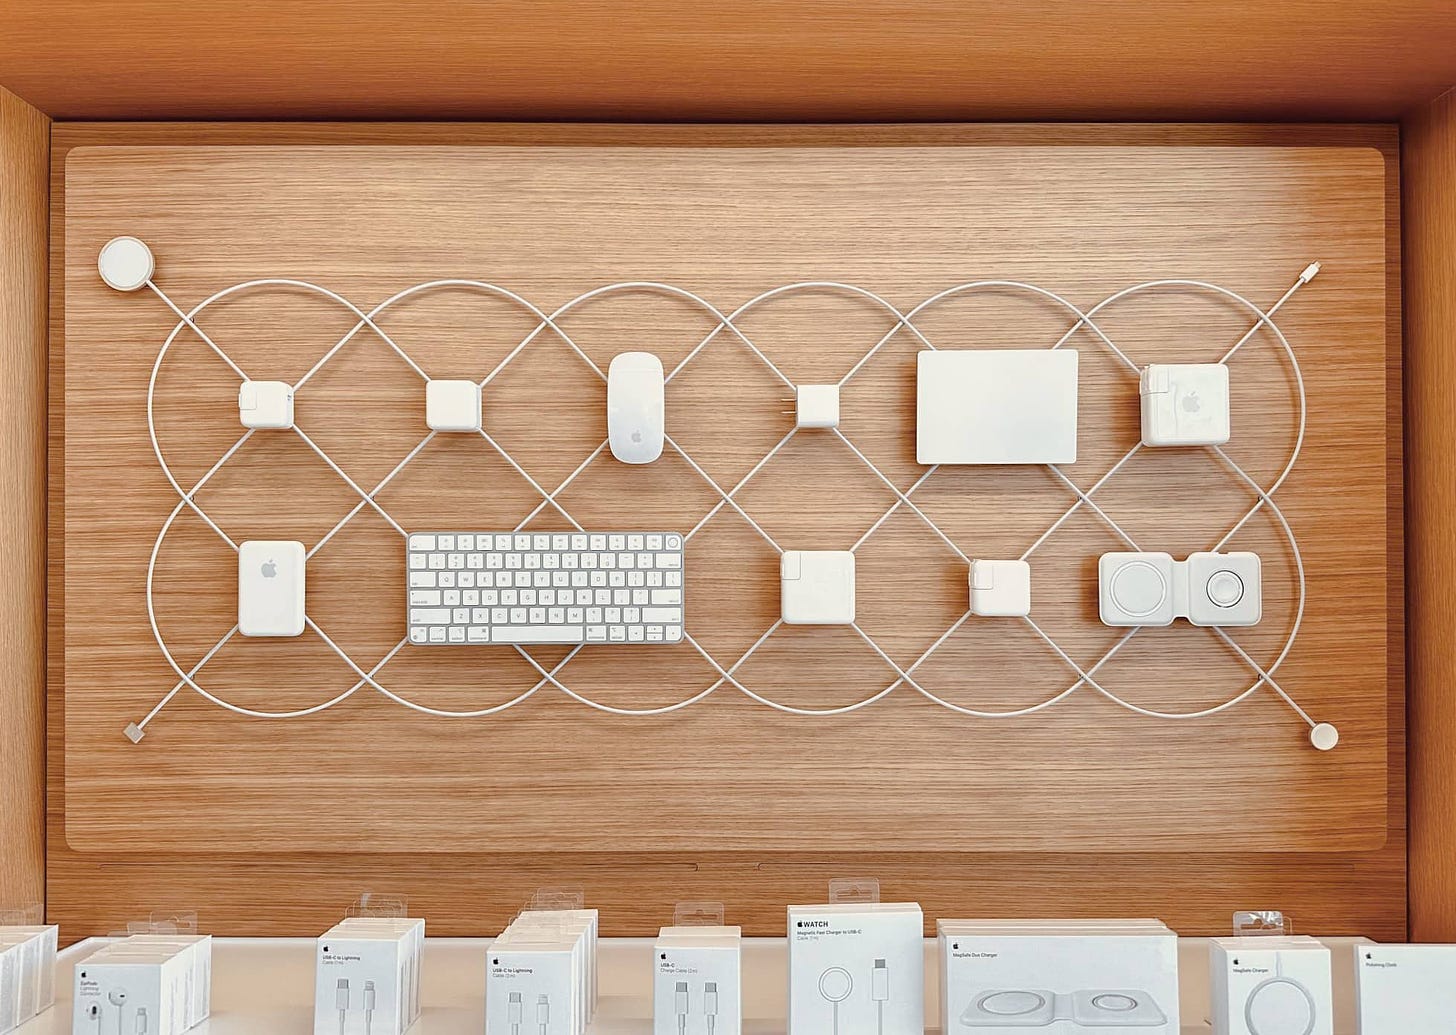 The new Essentials bay at Apple Park Visitor Center. iPhone, iPad, and Mac accessories are represented on a wood background with braided MagSafe chargers weaving a pattern in the background.